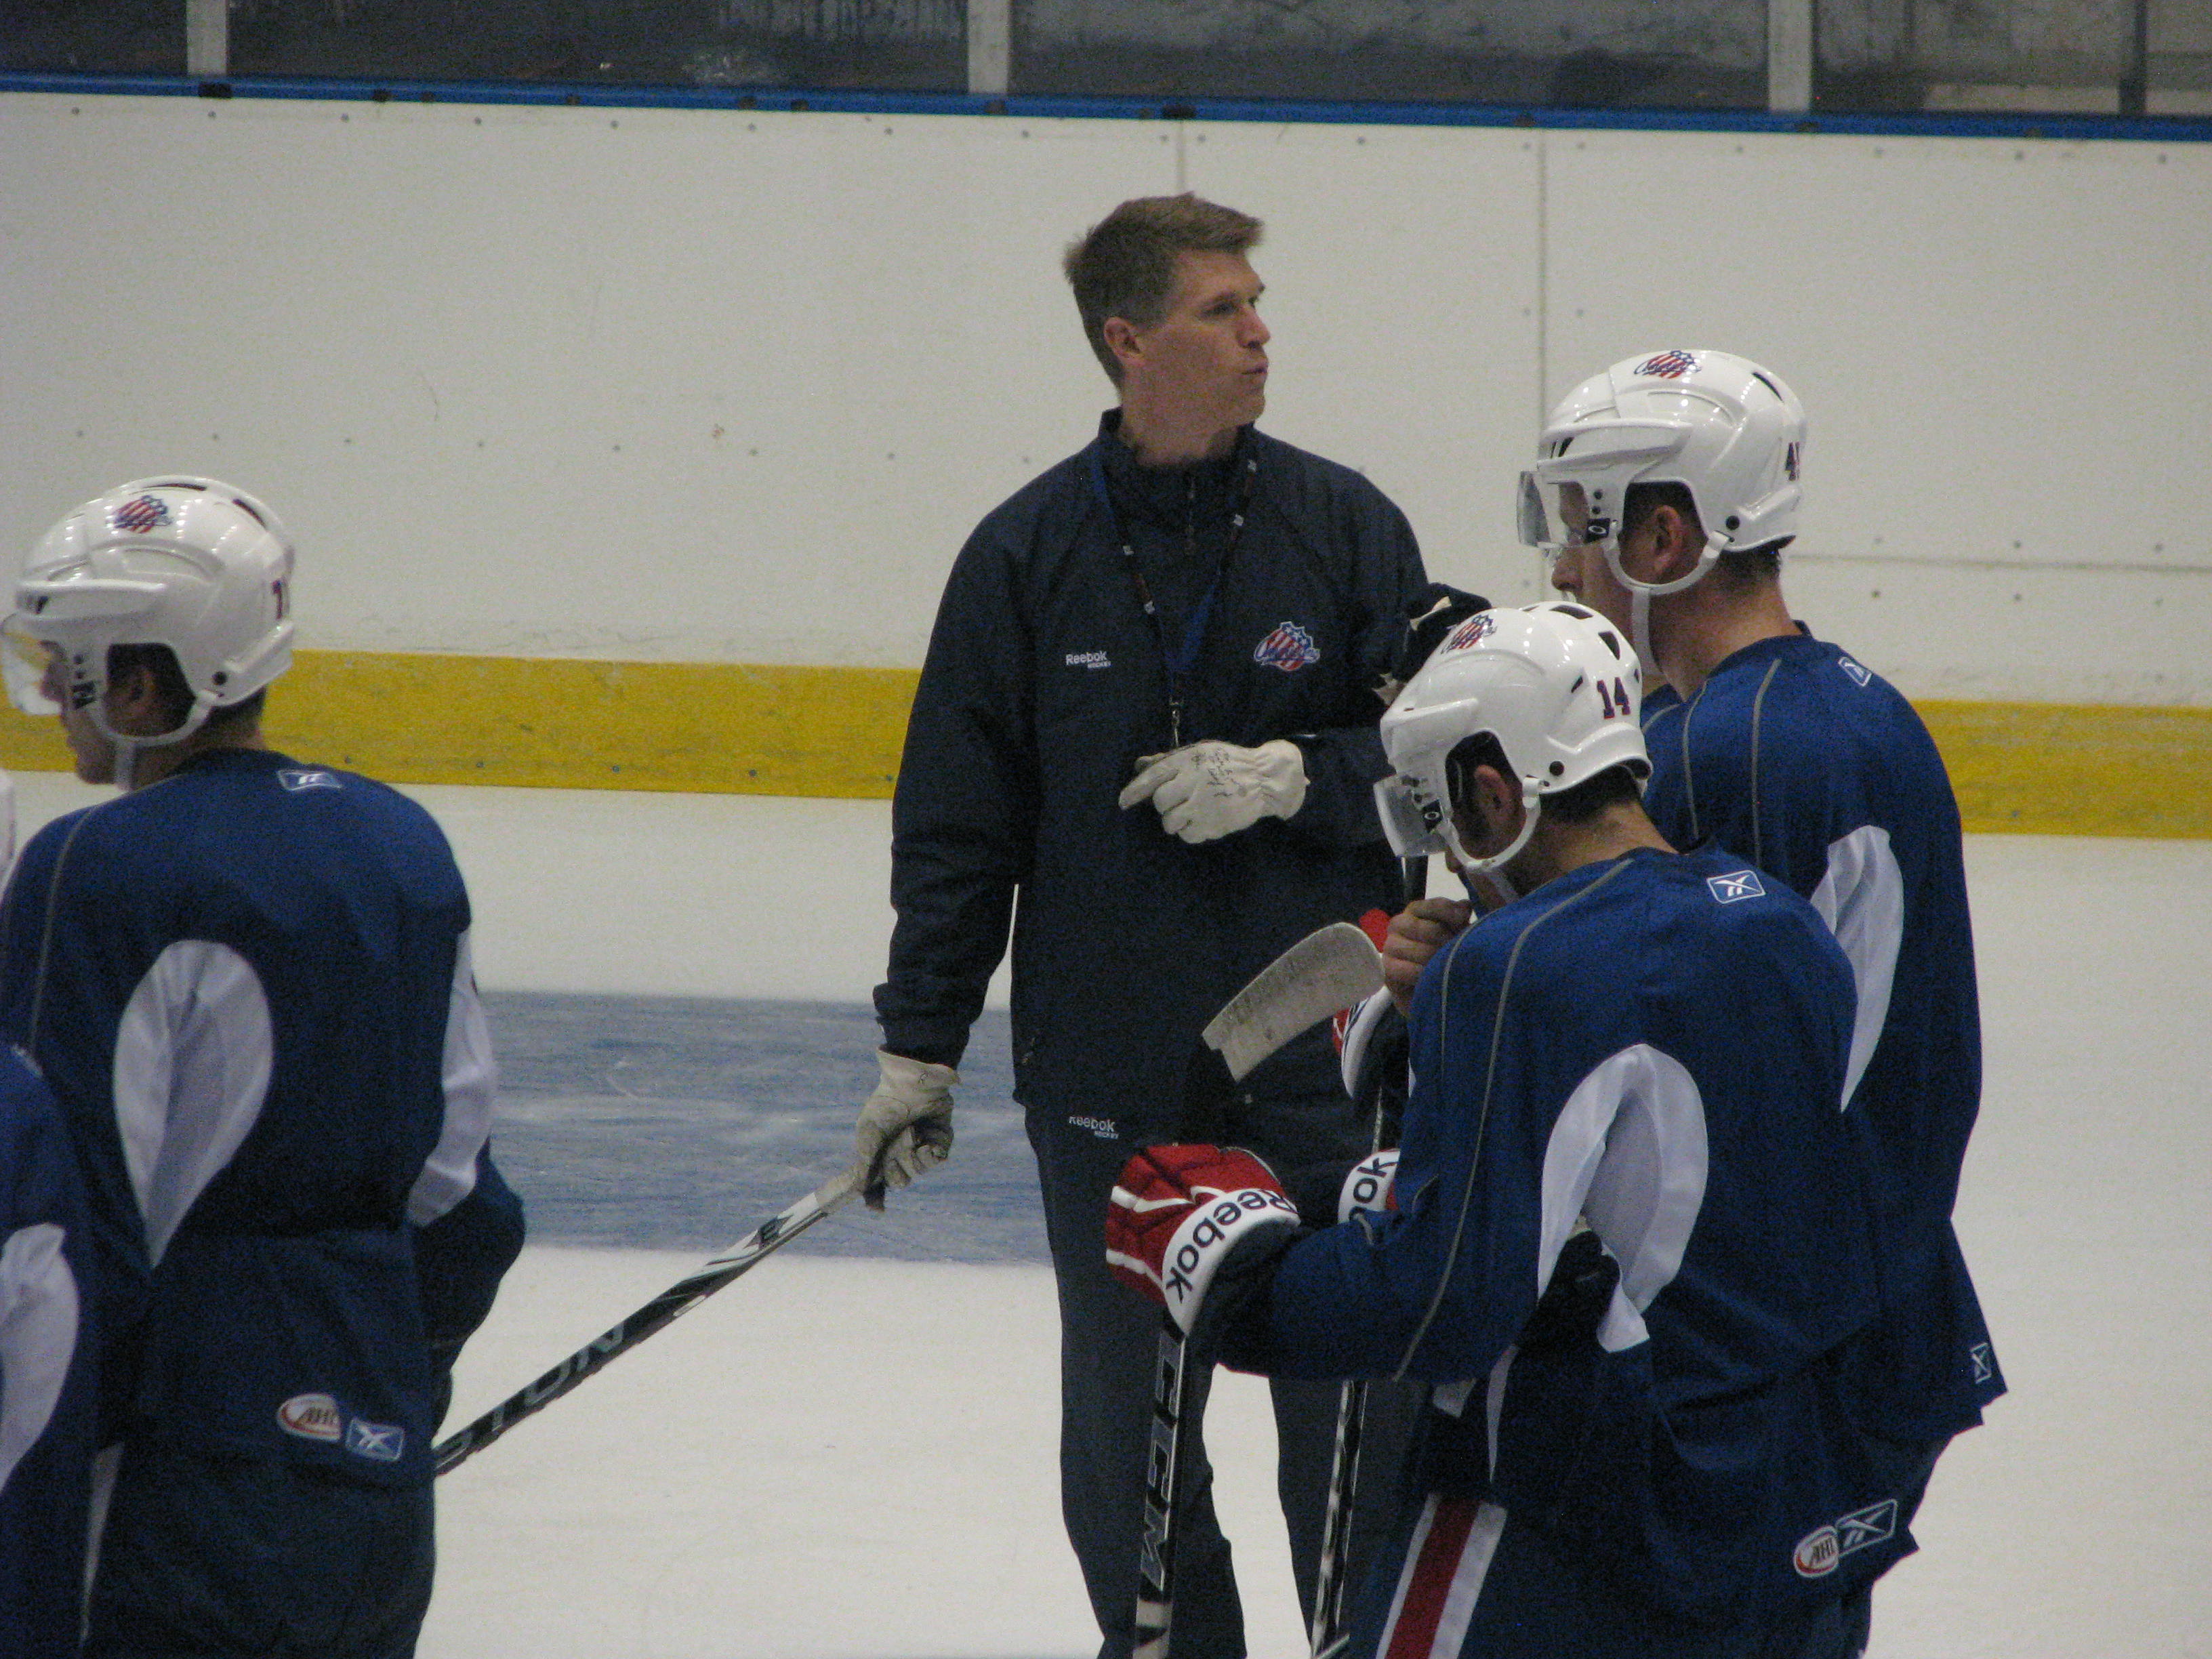 Rolston Looks to Get Amerks Chemistry Back Together